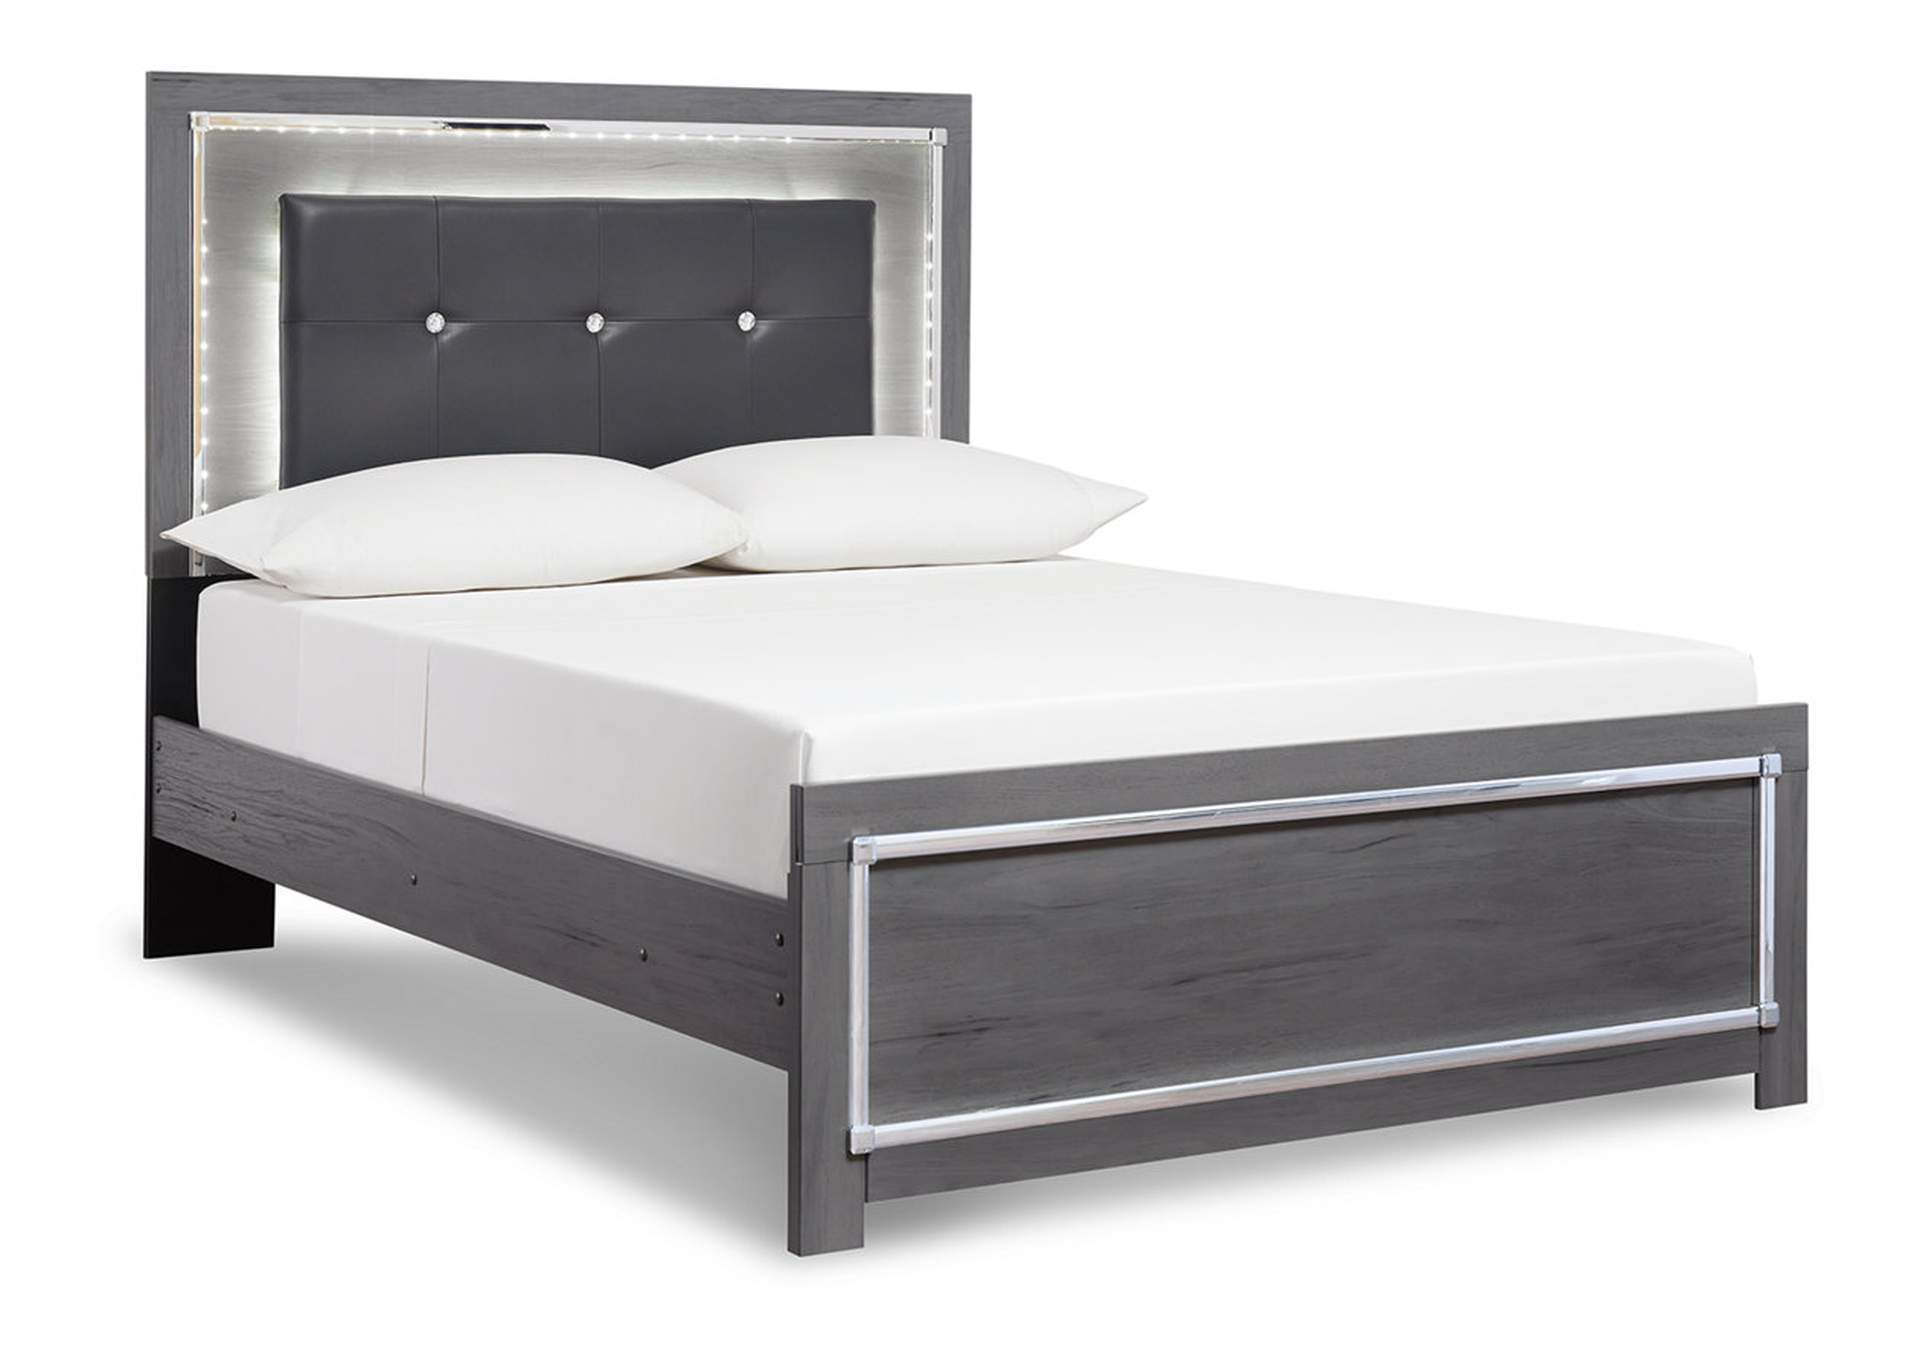 Lodanna Full Panel Bed with Mirrored Dresser, Chest and 2 Nightstands,Signature Design By Ashley